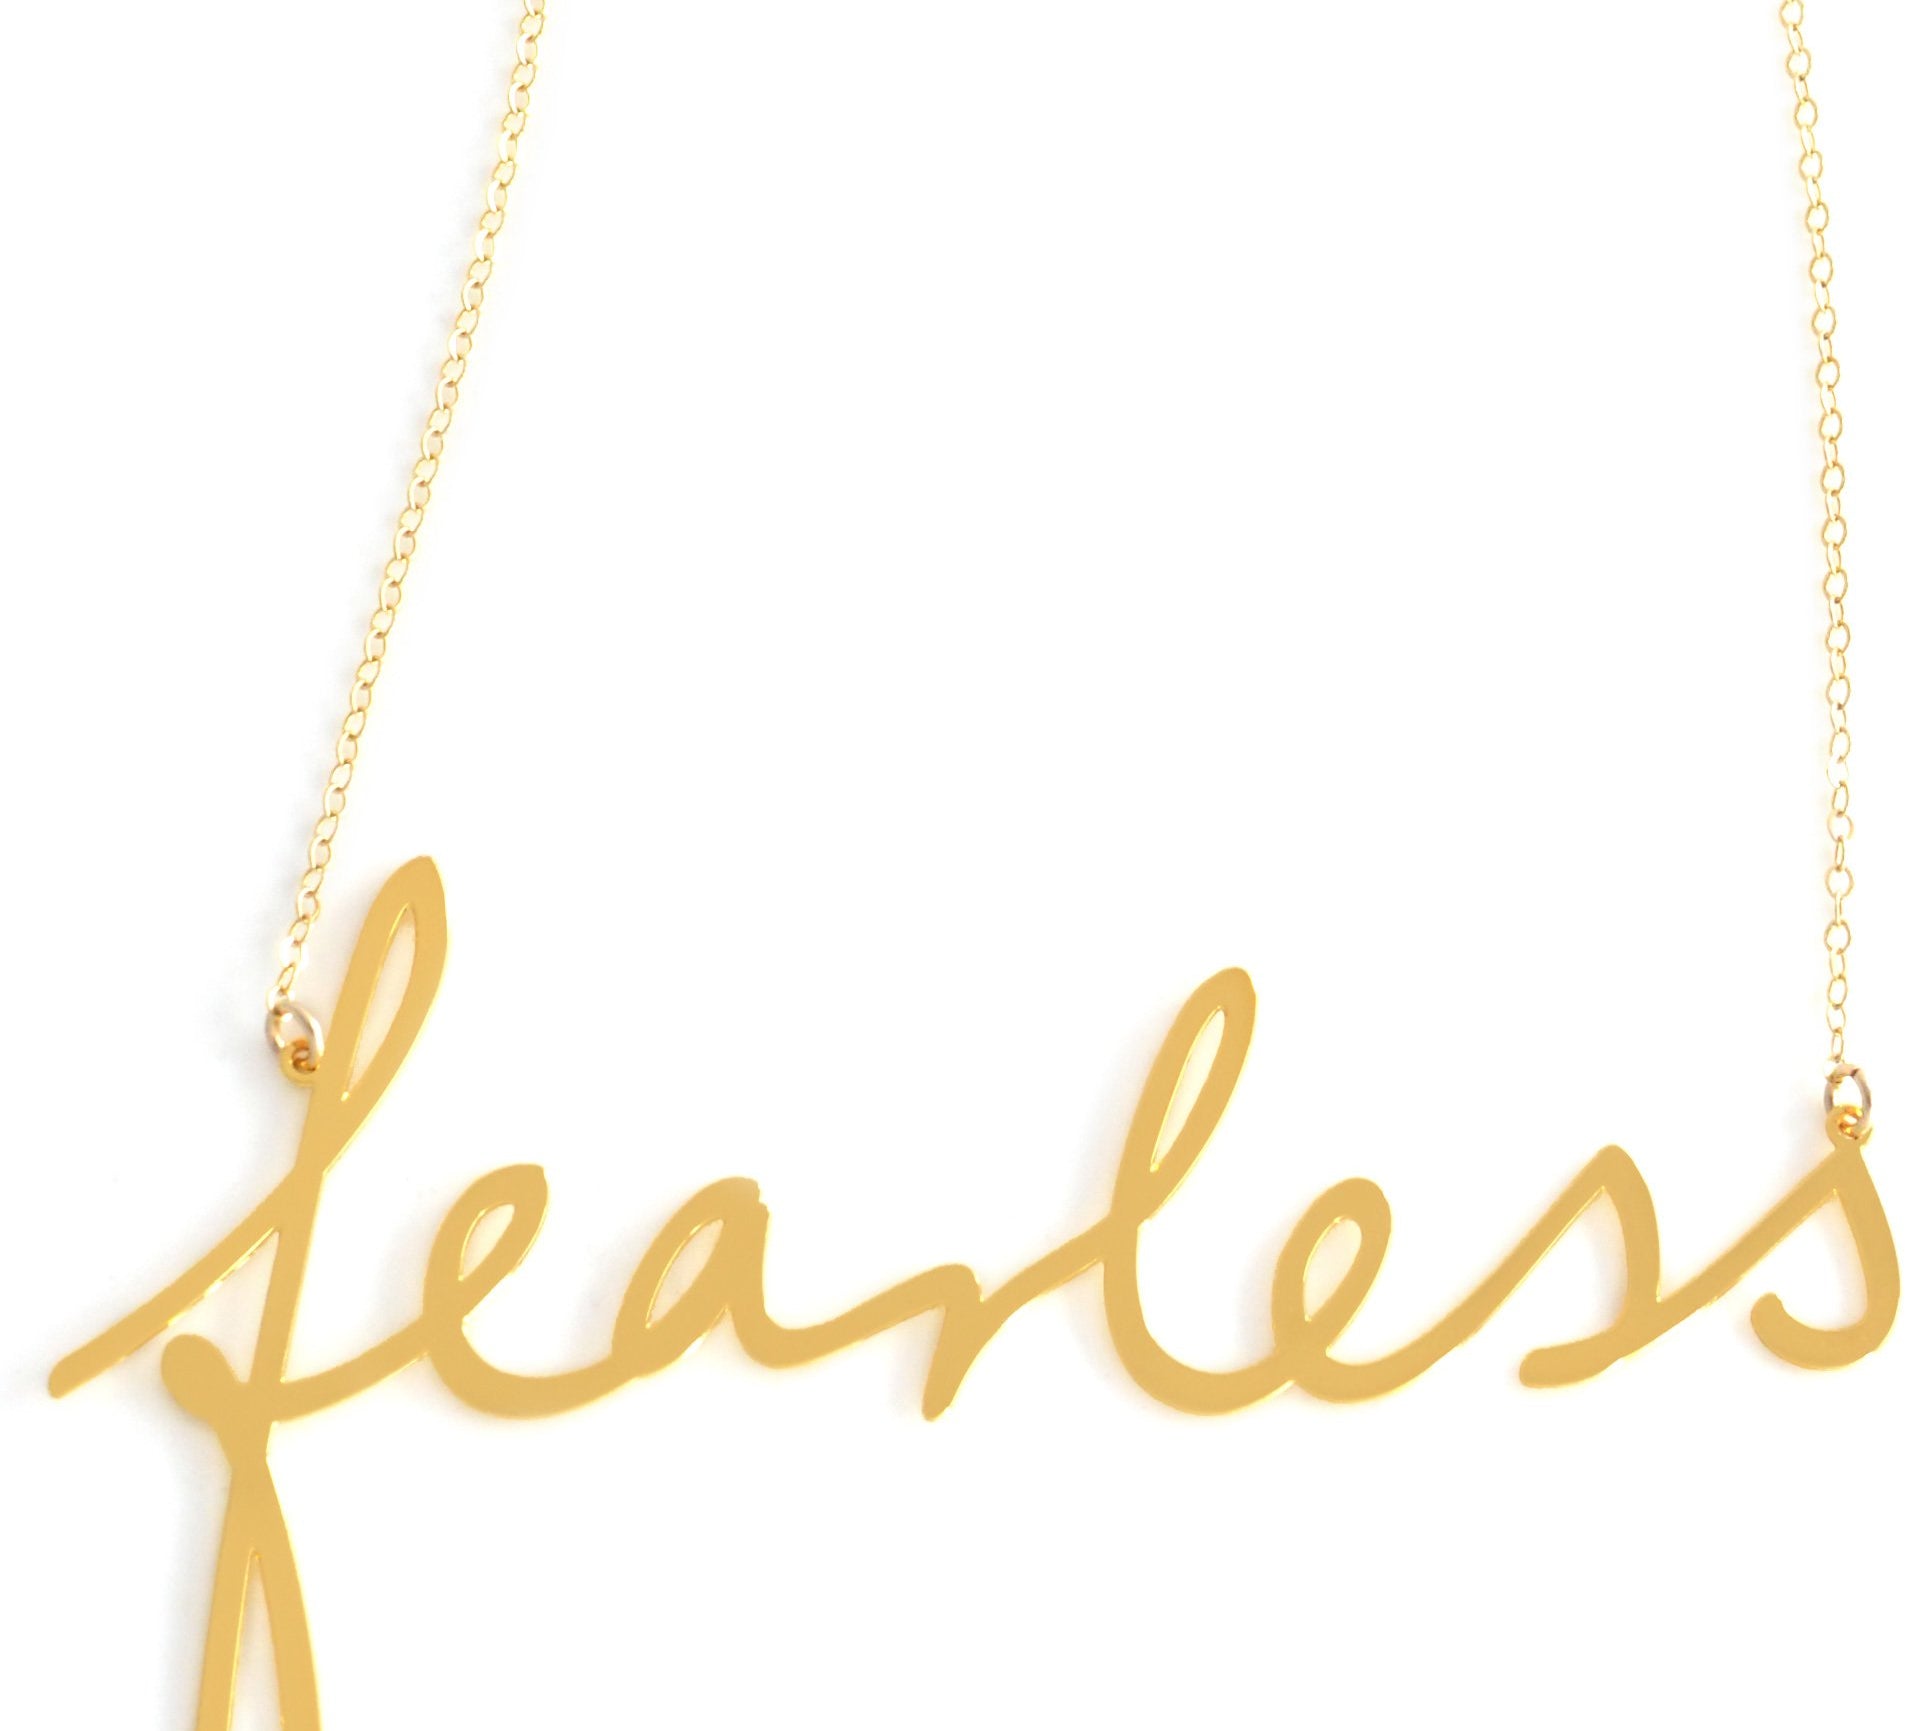 Fearless Necklace - High Quality, Affordable, Hand Written, Empowering, Self Love, Mantra Word Necklace - Available in Gold and Silver - Small and Large Sizes - Made in USA - Brevity Jewelry